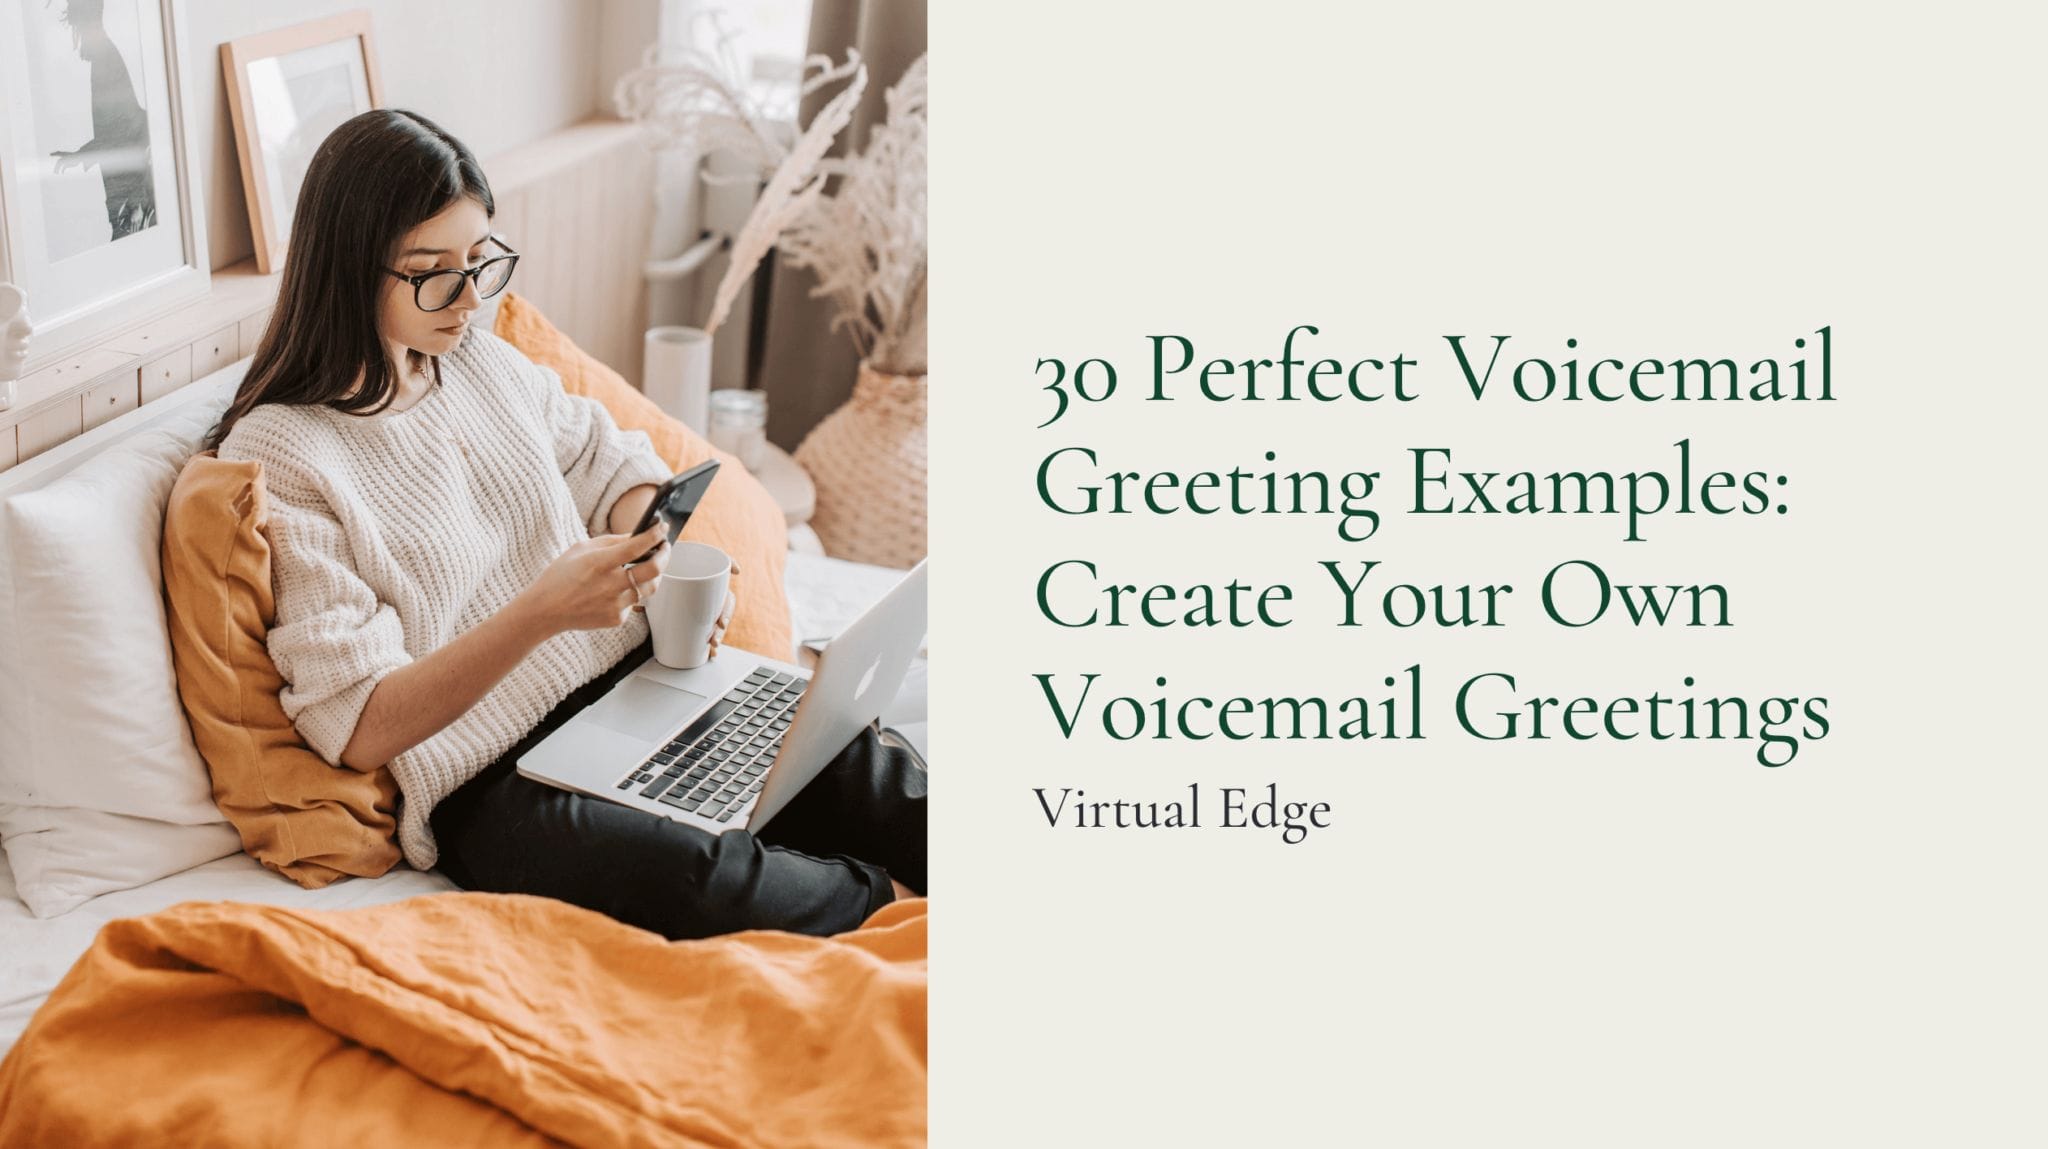 30 Perfect Voicemail Greeting Examples: Create Your Own Voicemail